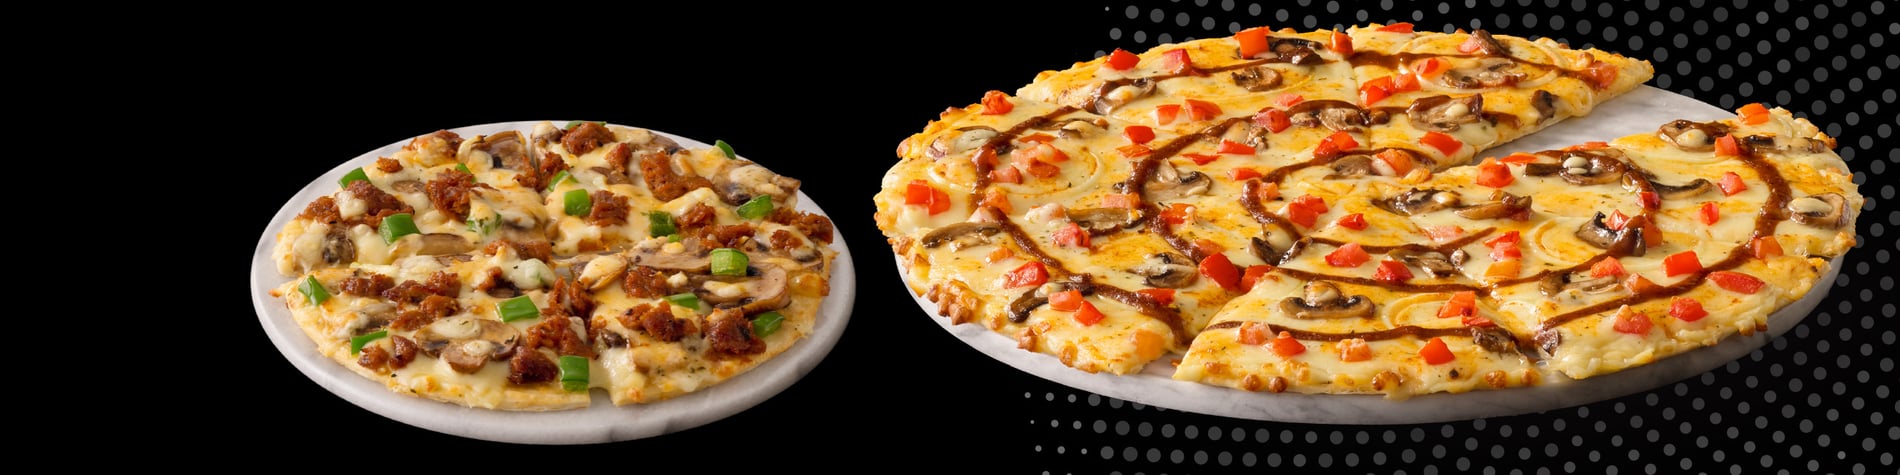 Buy 1, Try 1 FREE pizza promotion from Debonairs Pizza.